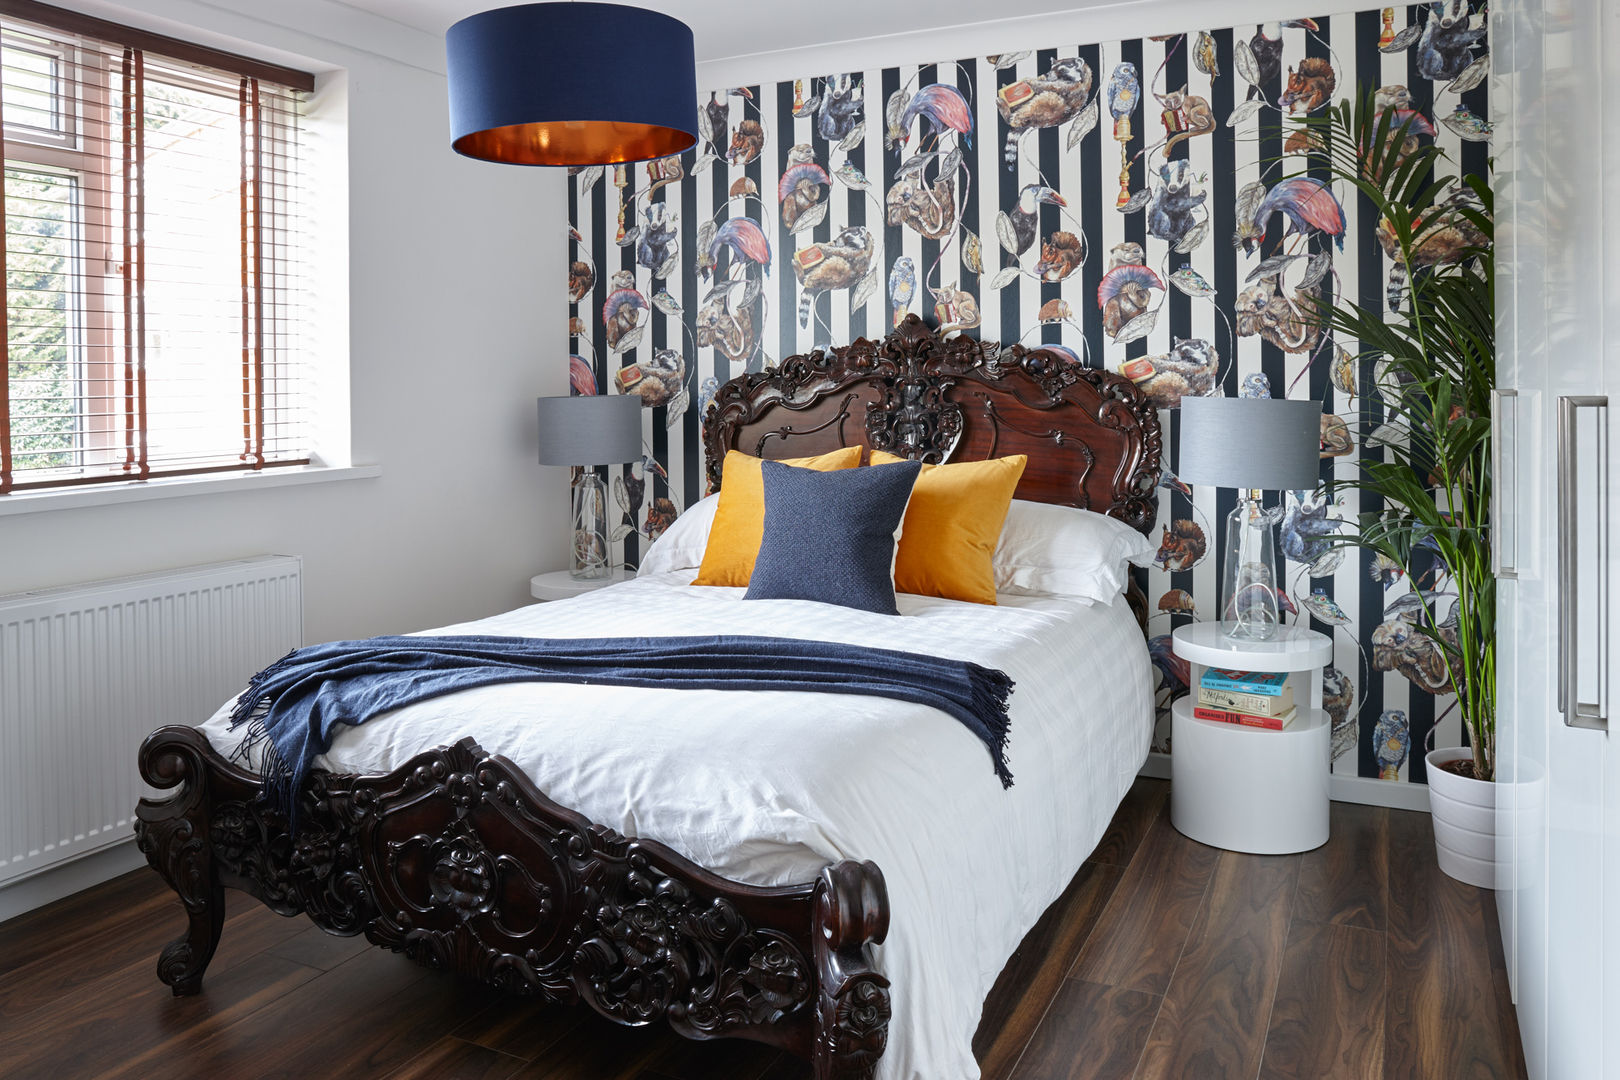 Virginia Water Apartment - Surrey Bhavin Taylor Design Chambre moderne Bedroom,bed,rococo style,bedside tables,wallapaper,feature wall,animals,blue,yellow,mustard,grey,bedding